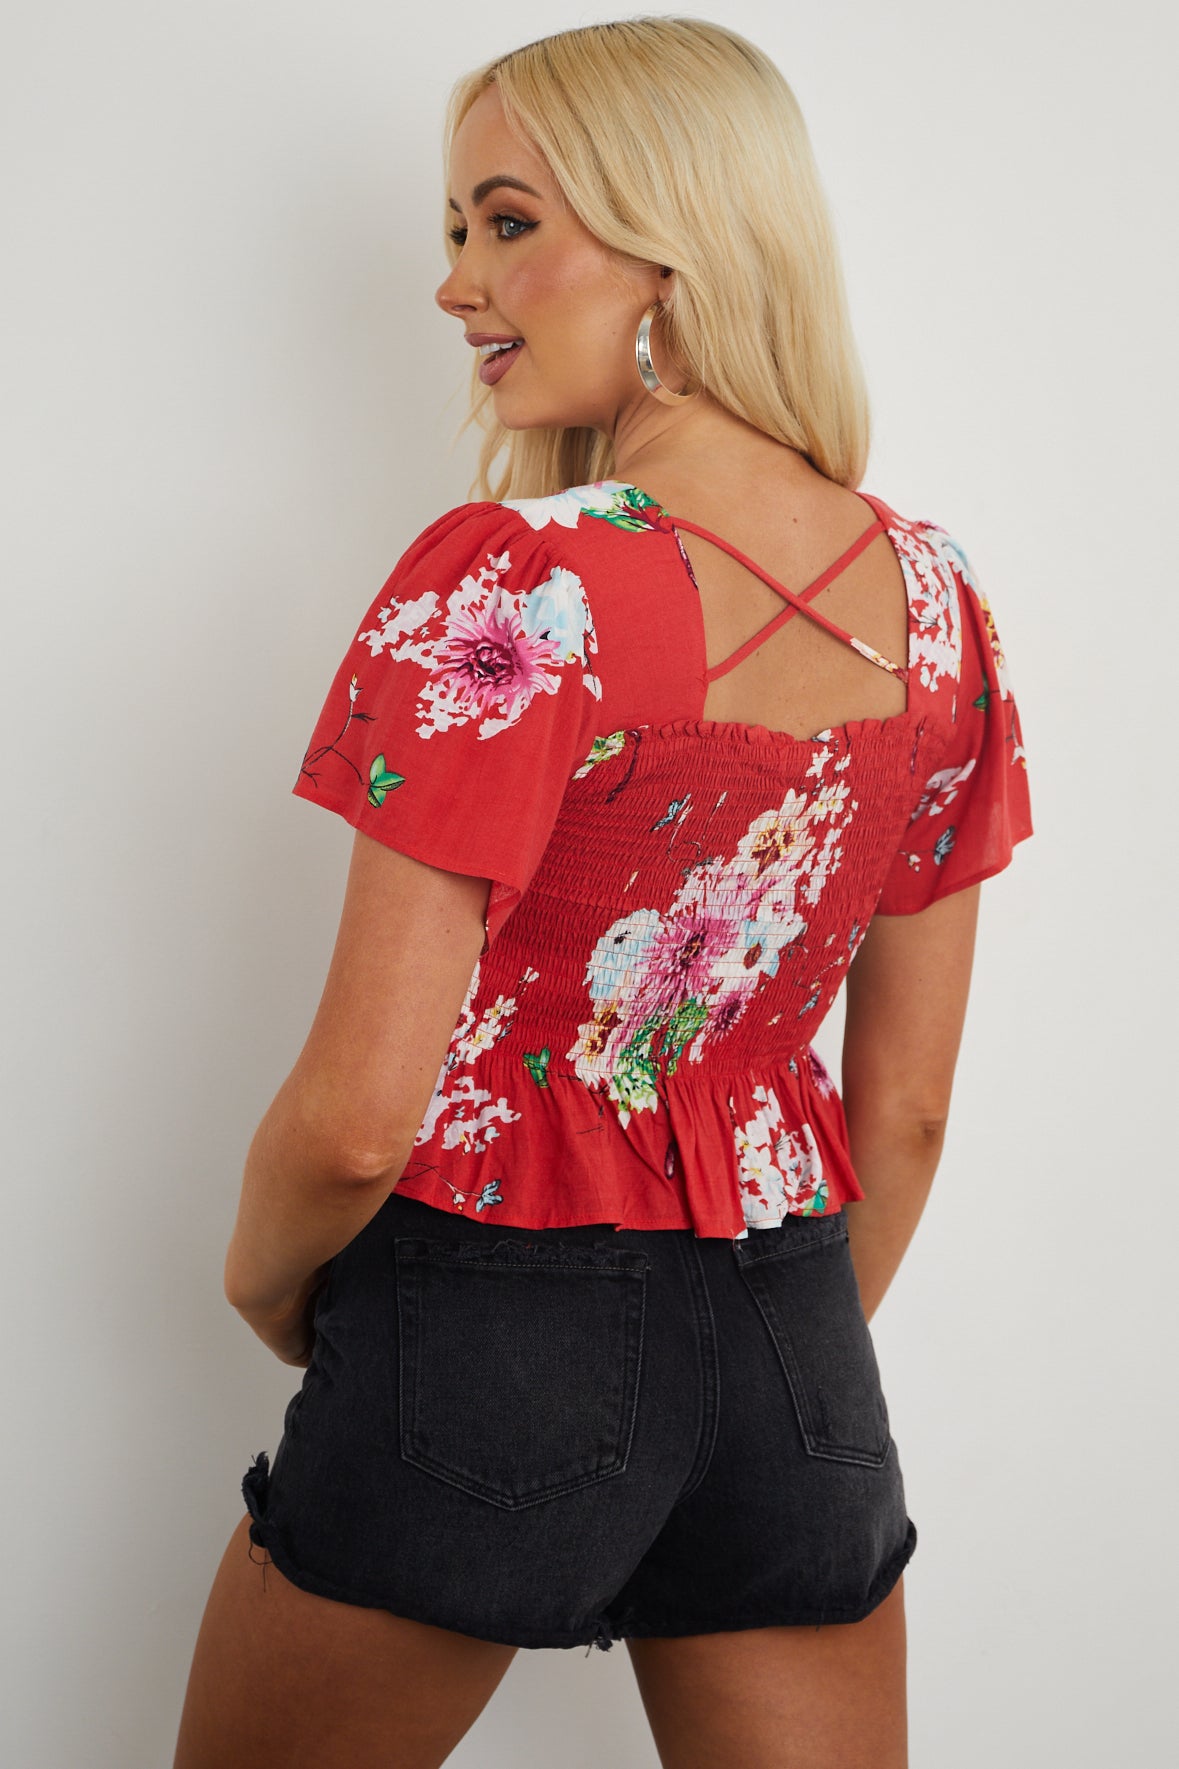 Tomato Red Floral Print Smocked Crop Top with Short Sleeves